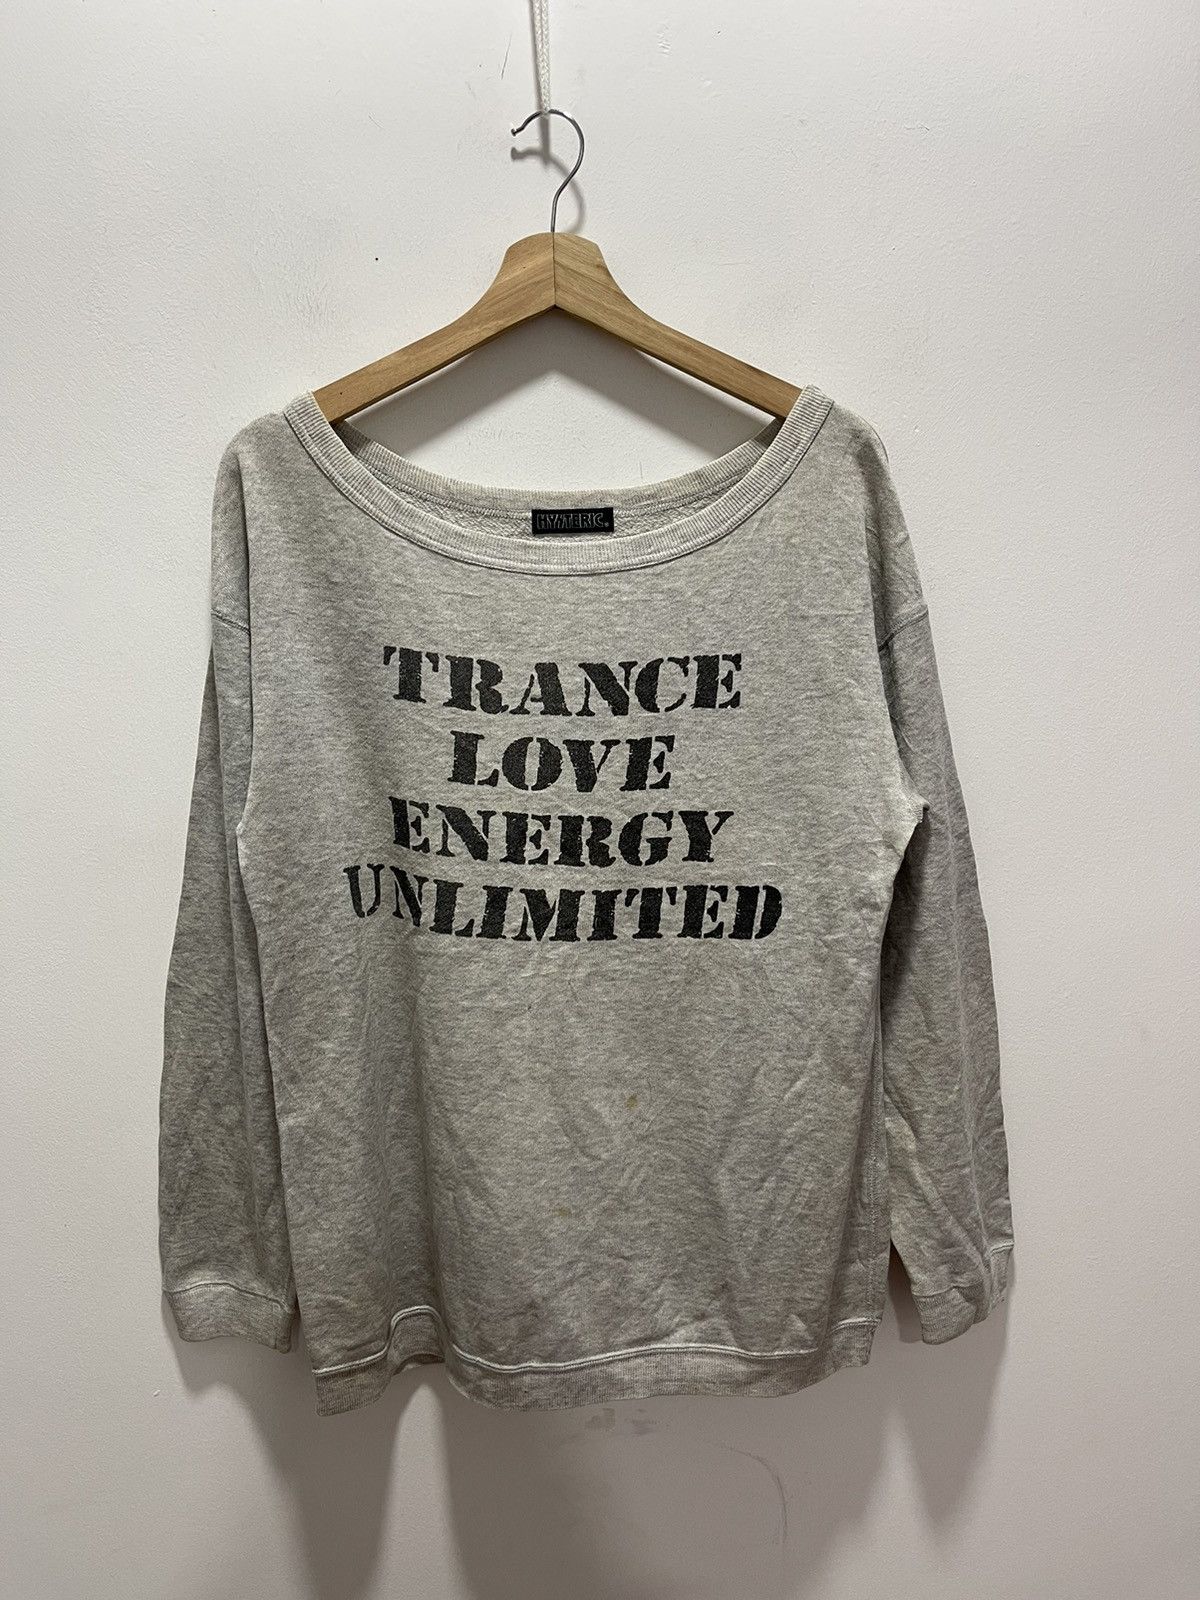 hysteric glamour “trance love energy unlimited” sweatshirt